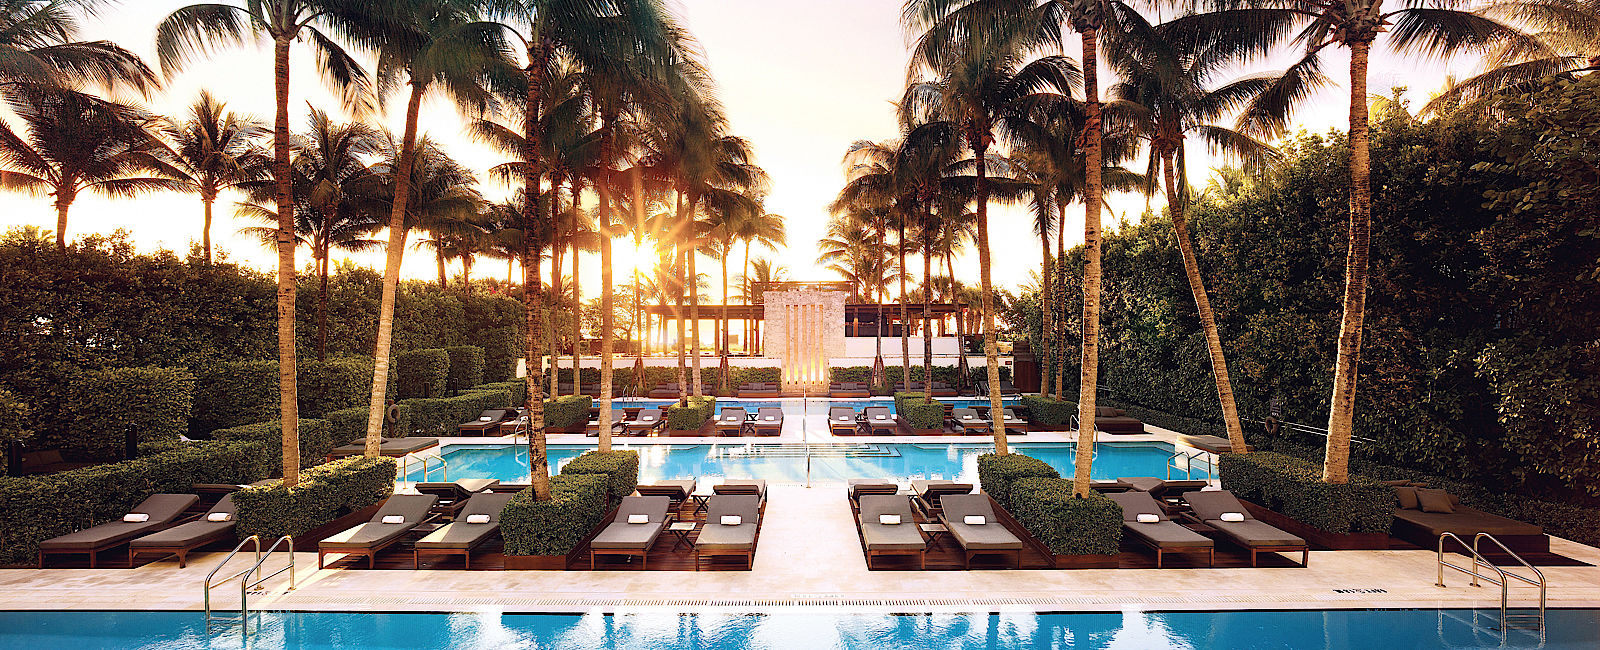 HOTELTEST
 The Setai 
 Luxus mit Asia Touch am South Beach 